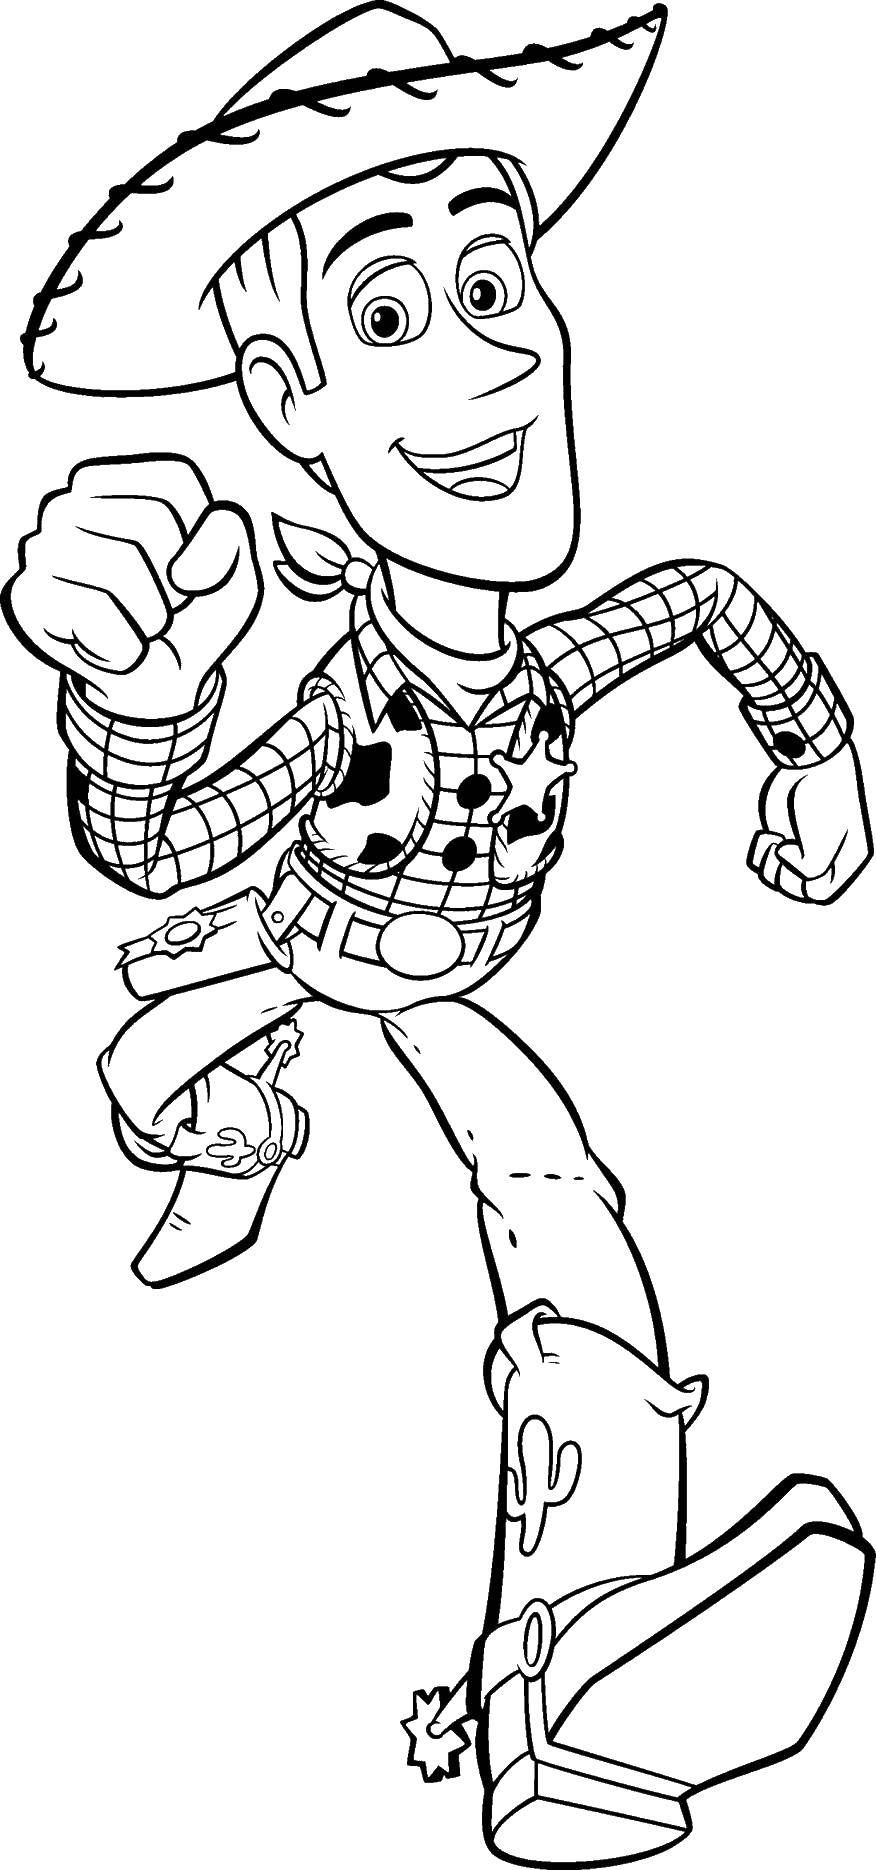 Coloring Cowboy from toy story . Category Disney coloring pages. Tags:  Disney, toy Story , cowboy, .